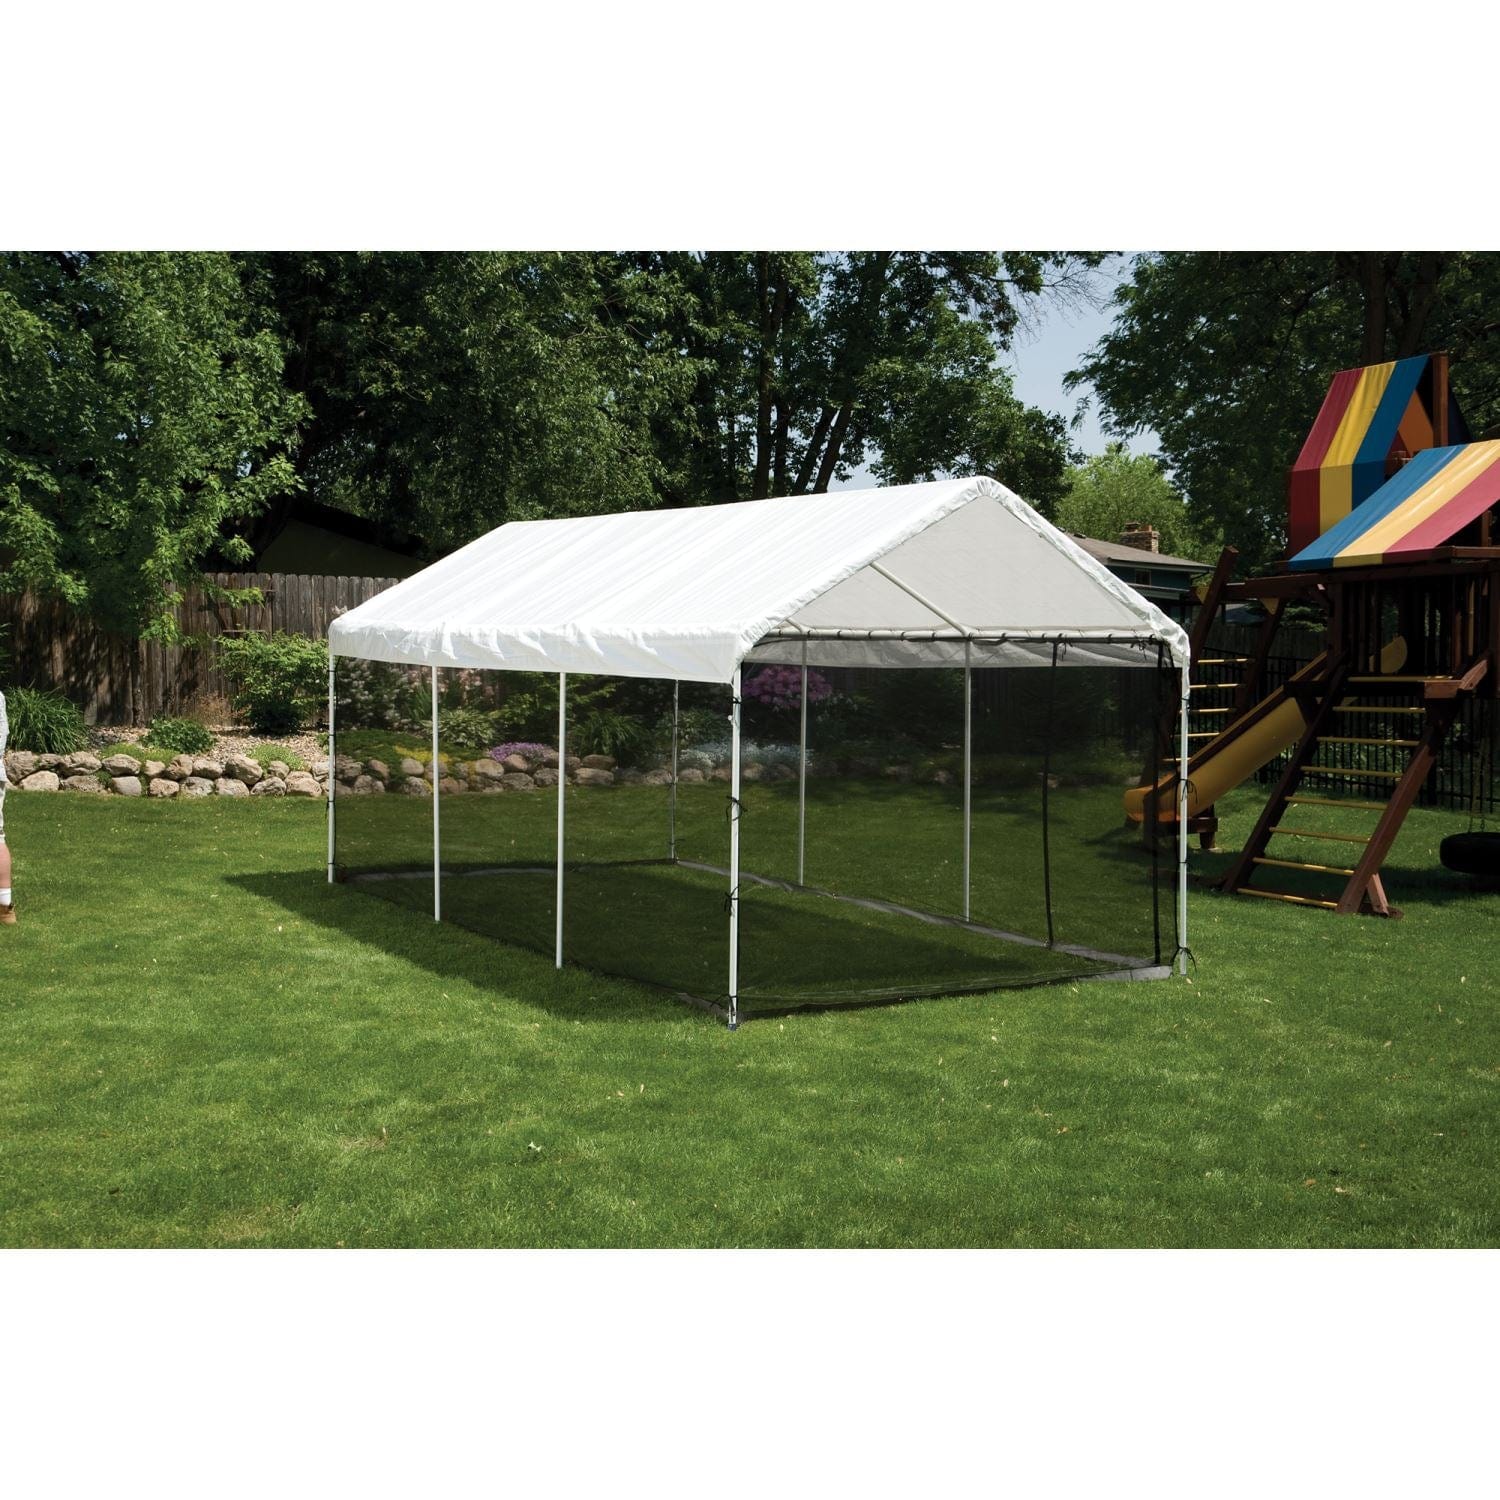 The Fulfiller Canopies ShelterLogic | MaxAP Canopy 2-in-1 Screen Kit 10x20 ft. 23531